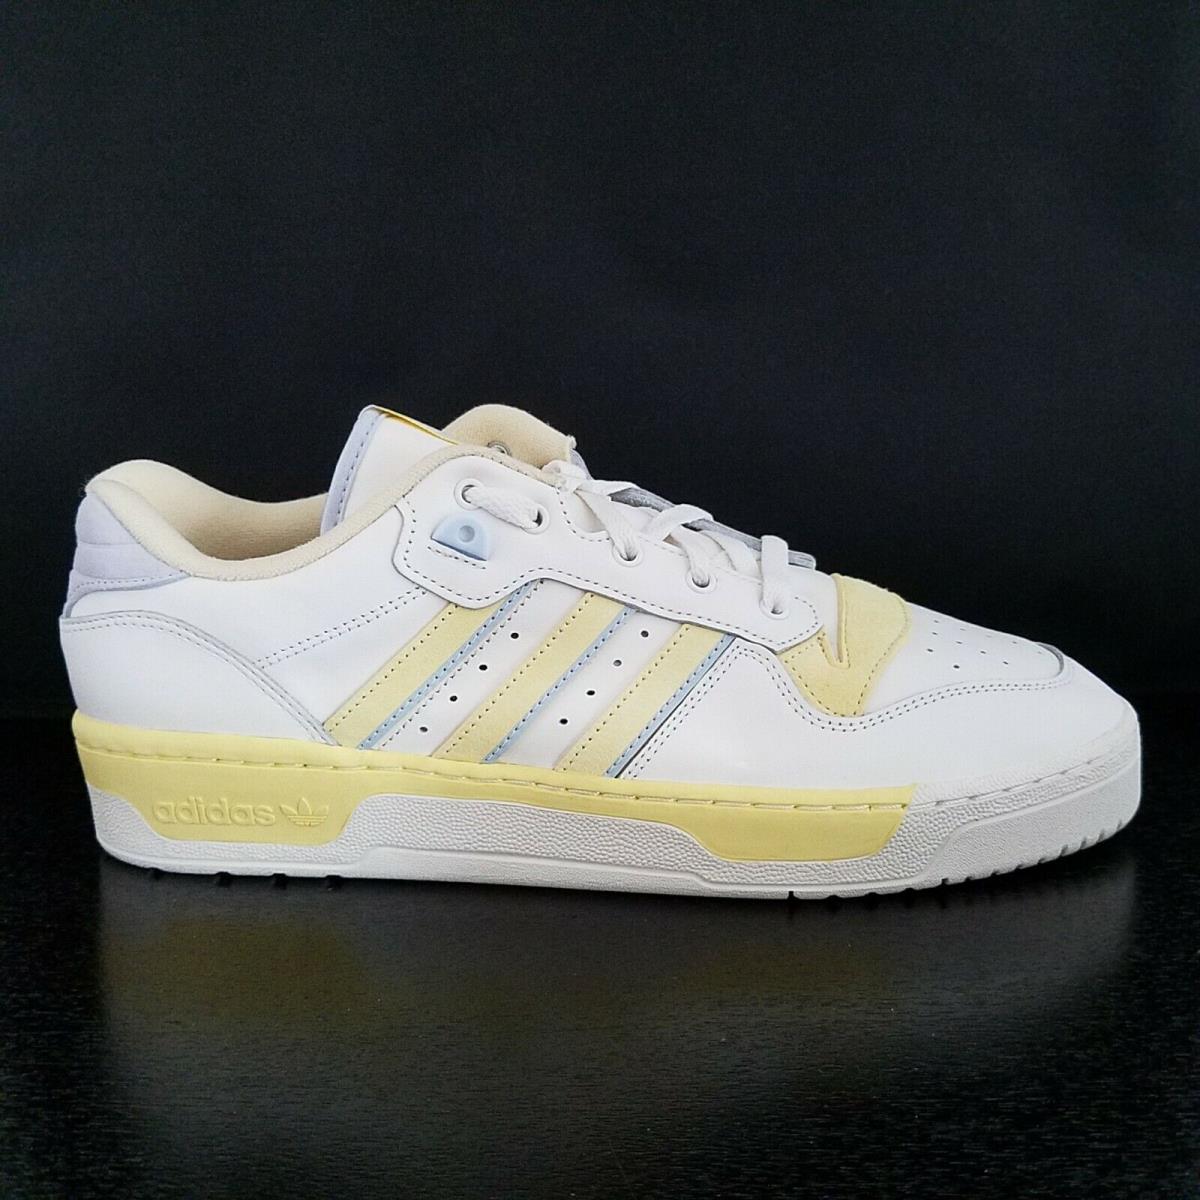 Adidas Rivalry Low Street Shoes White Yellow Premium Leather EE5920 US 13 / 48